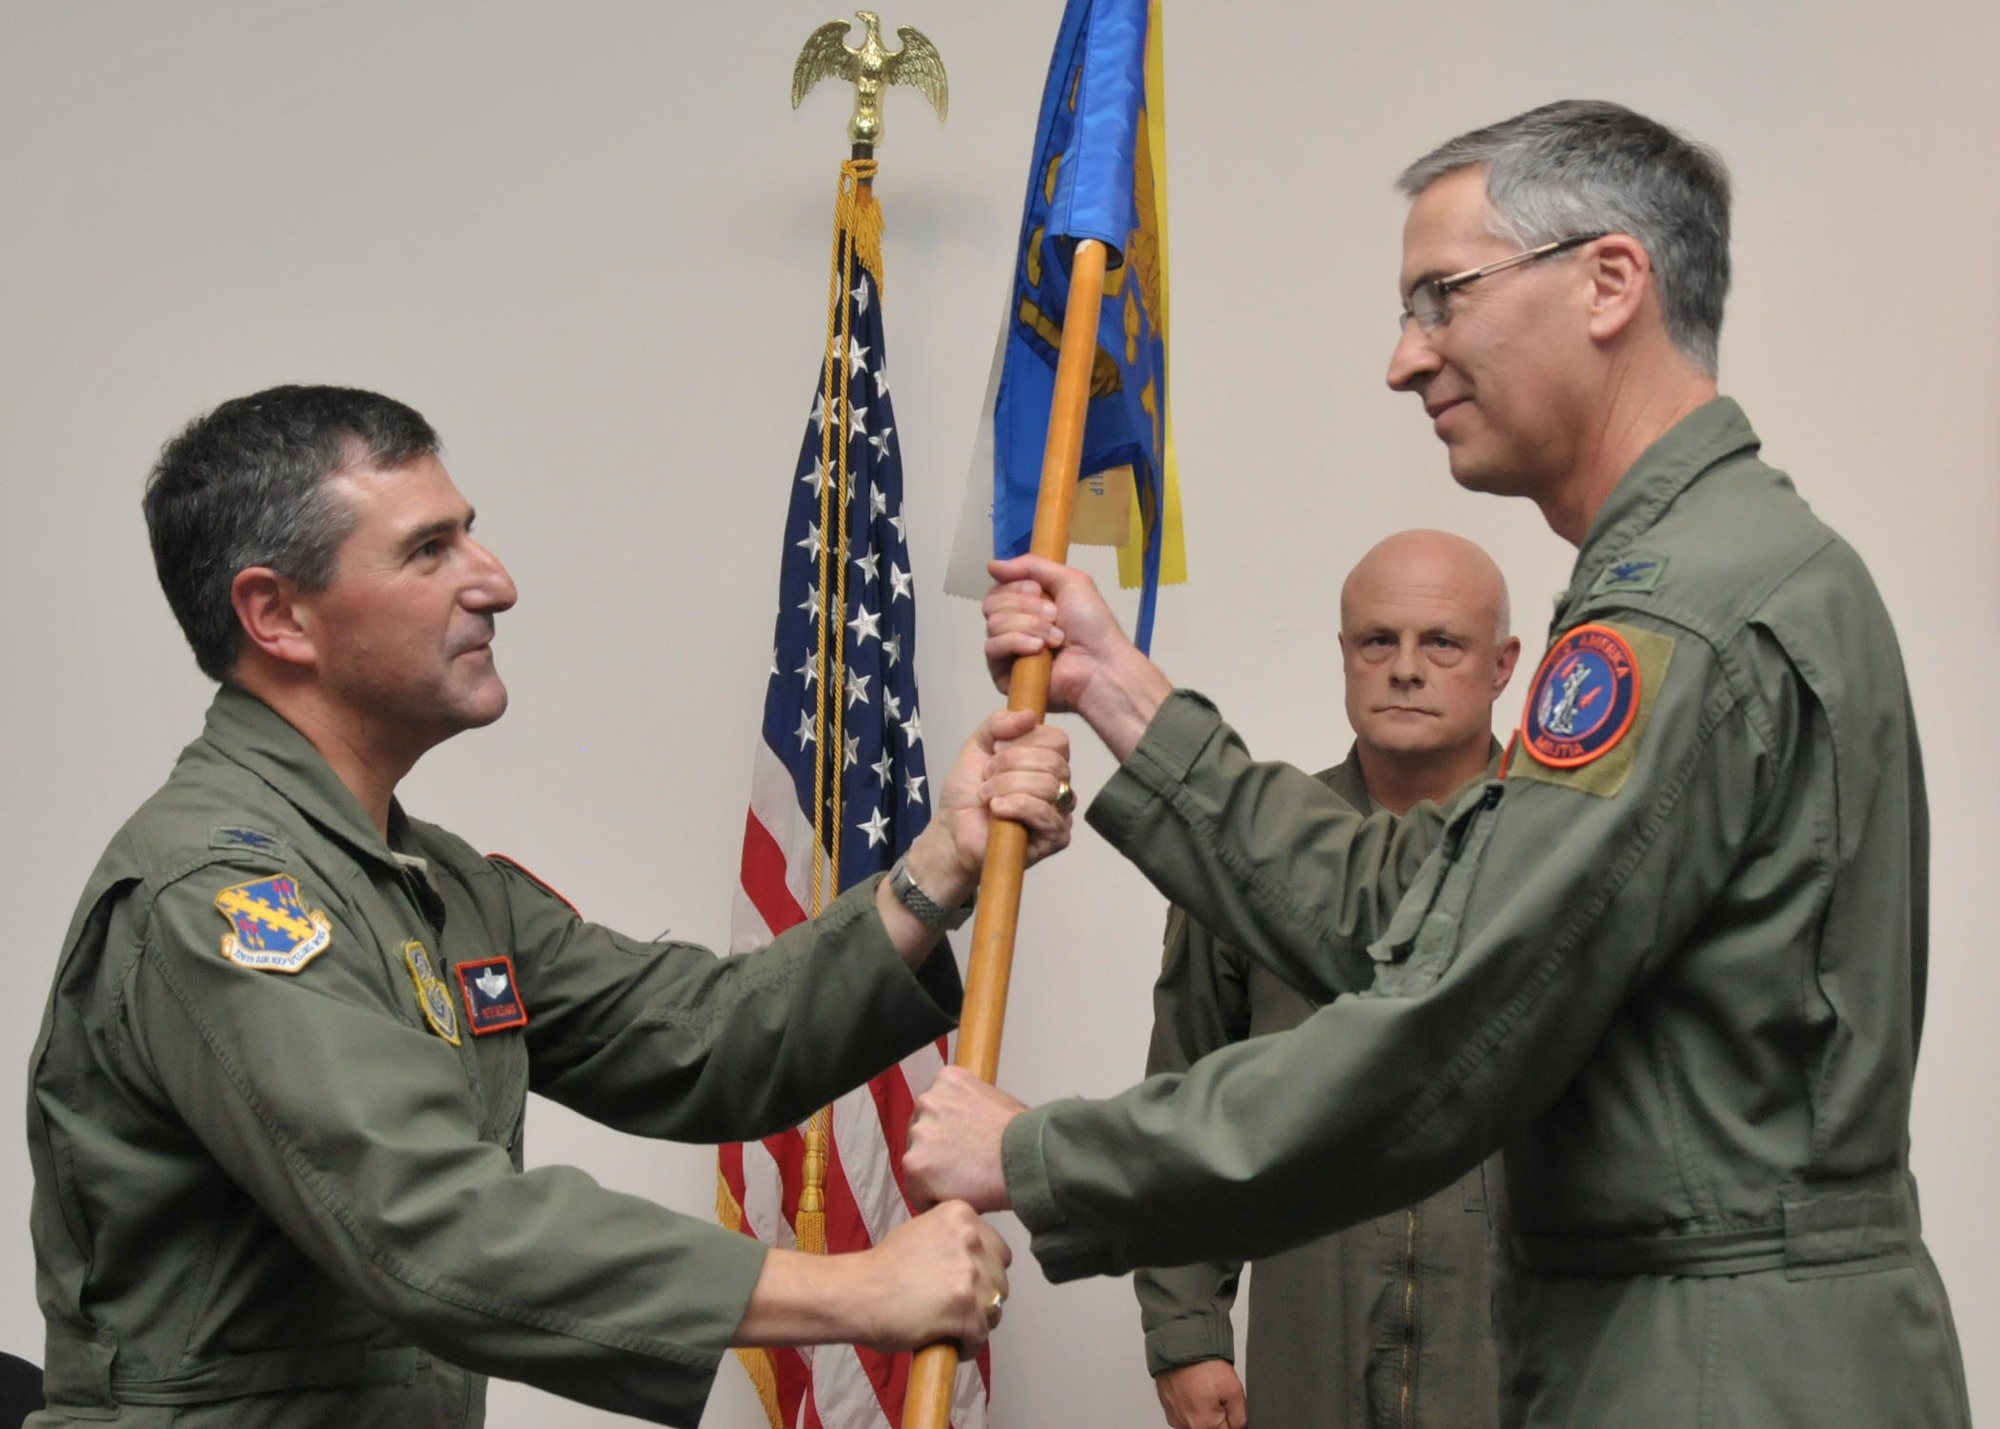 Col. Peter Nezamis (left) hands the 126th Operations Group guidon to Col. Jeffrey Jacobson in a traditional military Change of Command ceremony on Nov. 5, 2011 at Scott AFB, Ill. By accepting the guidon, Col. Jacobson symbolically accepts the responsibilities as commander over the Airmen of the group. (National Guard photo by Master Sgt. Franklin Hayes)